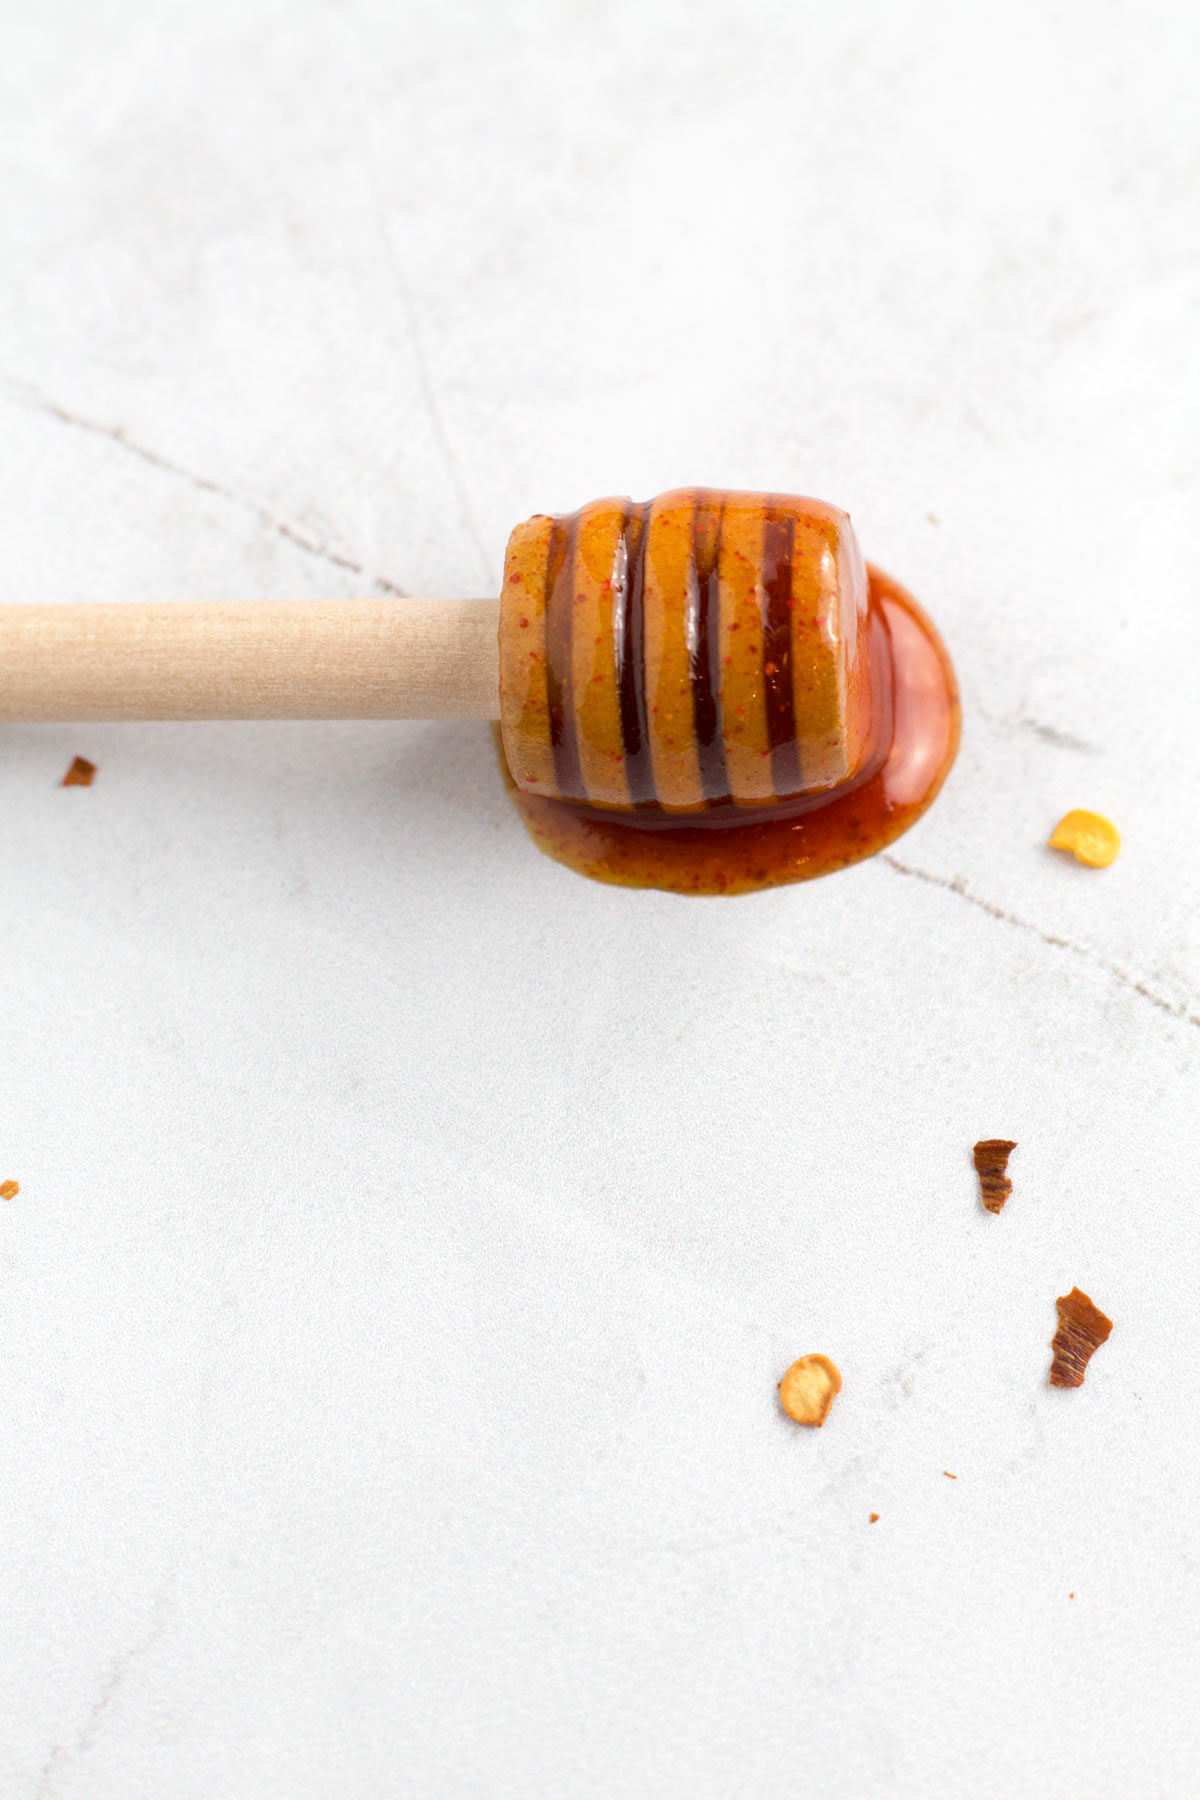 A honey dipper laying on the counter in a buddle hot honey sauce with chili pepper flakes sprinkled around.